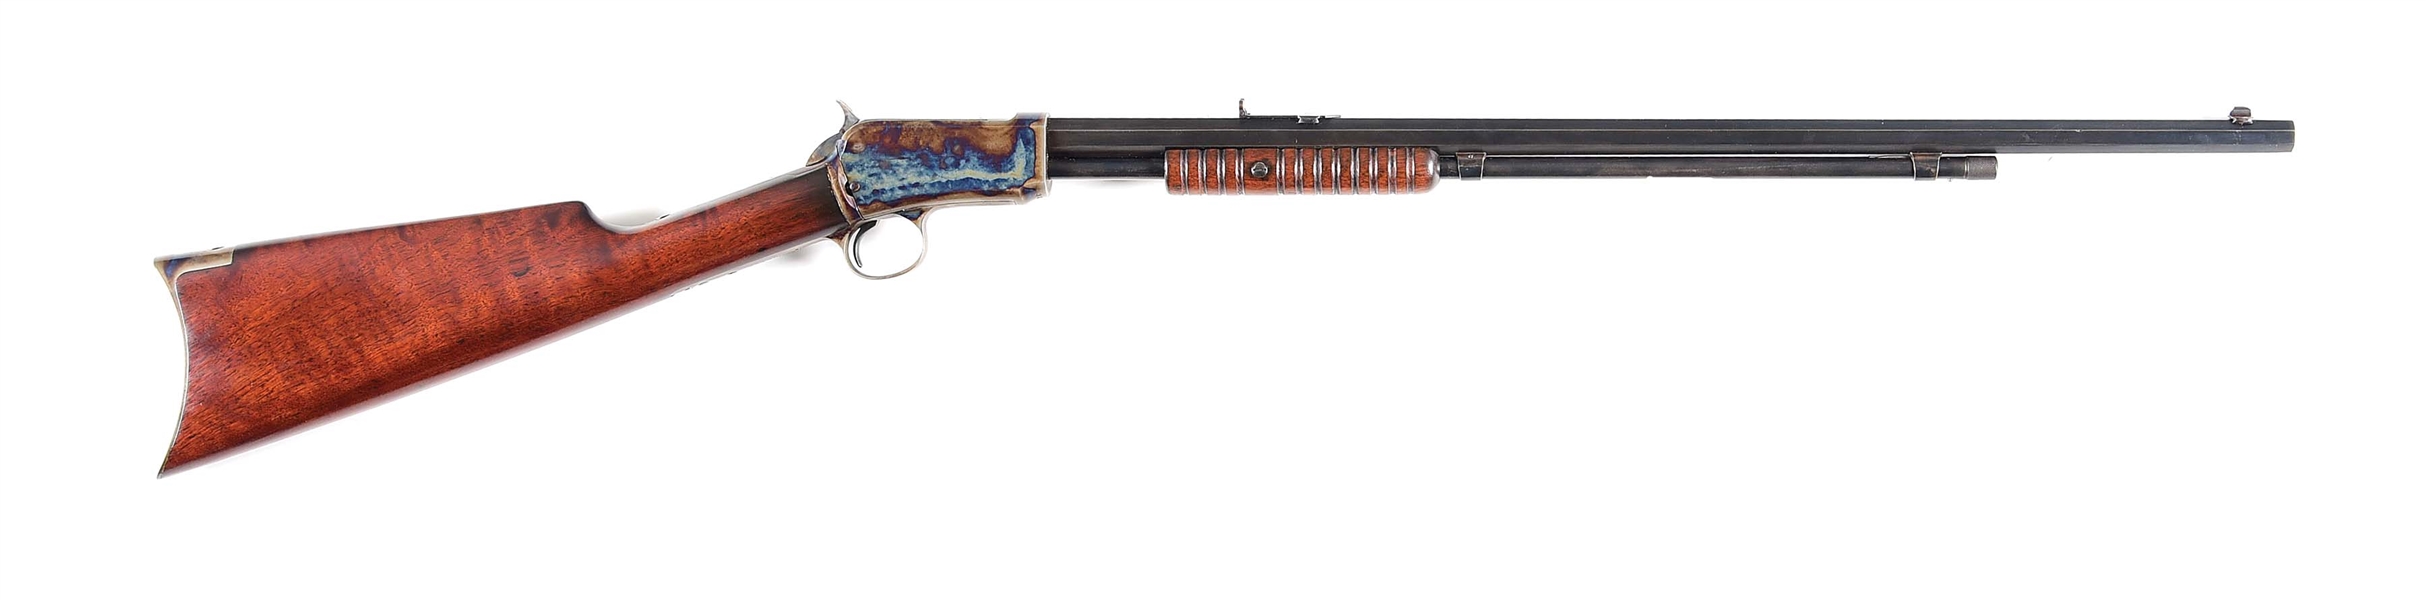 (C) WINCHESTER MODEL 90 .22 W.R.F. PUMP ACTION RIFLE (1907).